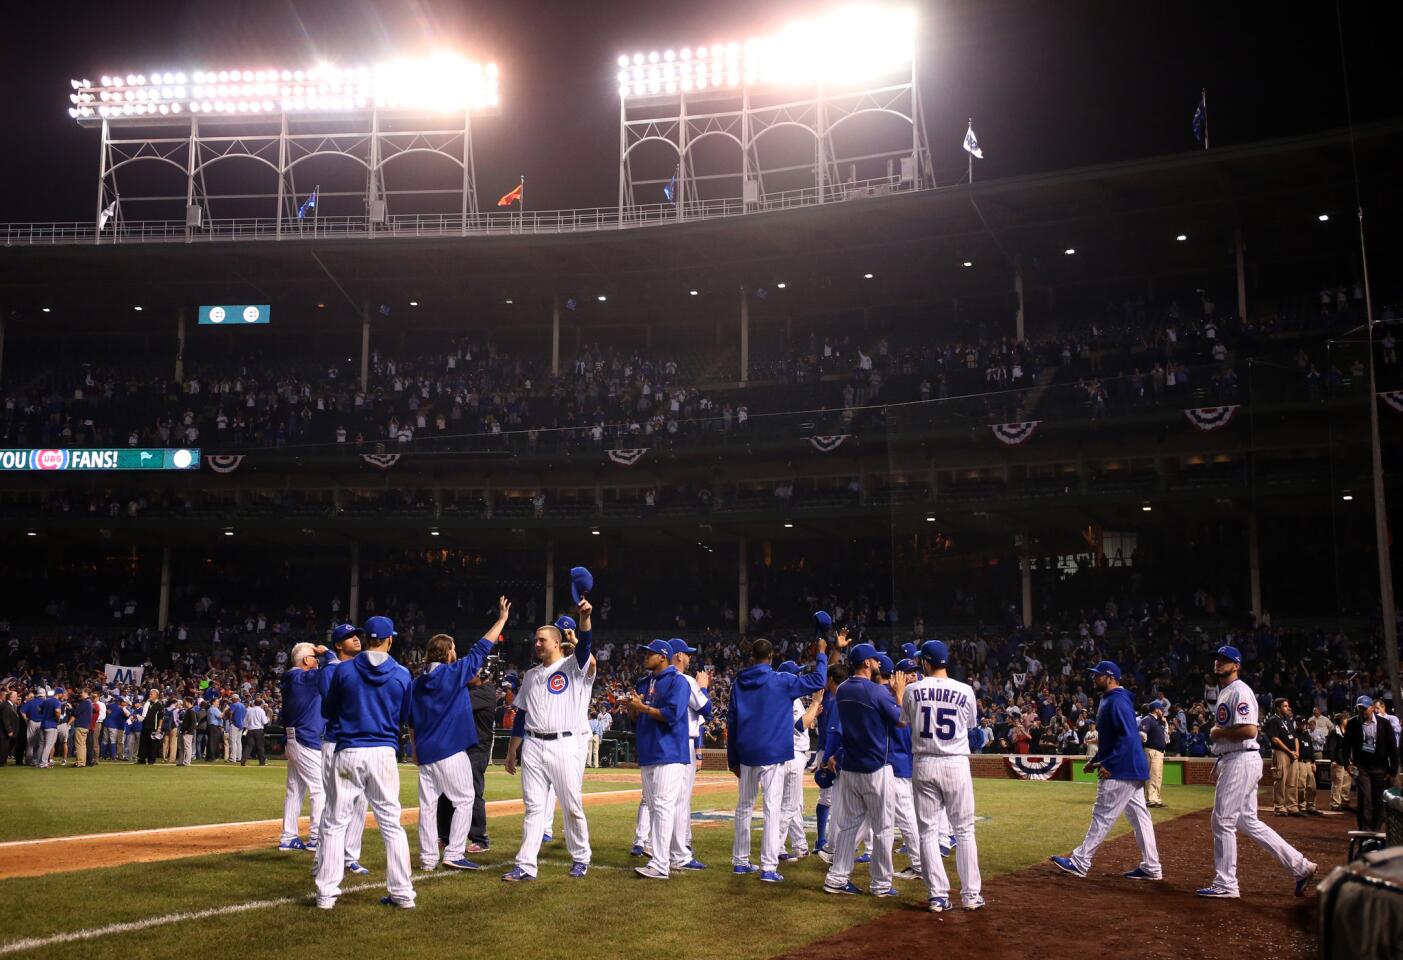 The Chicago Cubs acknowledge the fans after Game 4 of the National League Championship Series playoff Wednesday, Oct. 21, 2015 at Wrigley Field.